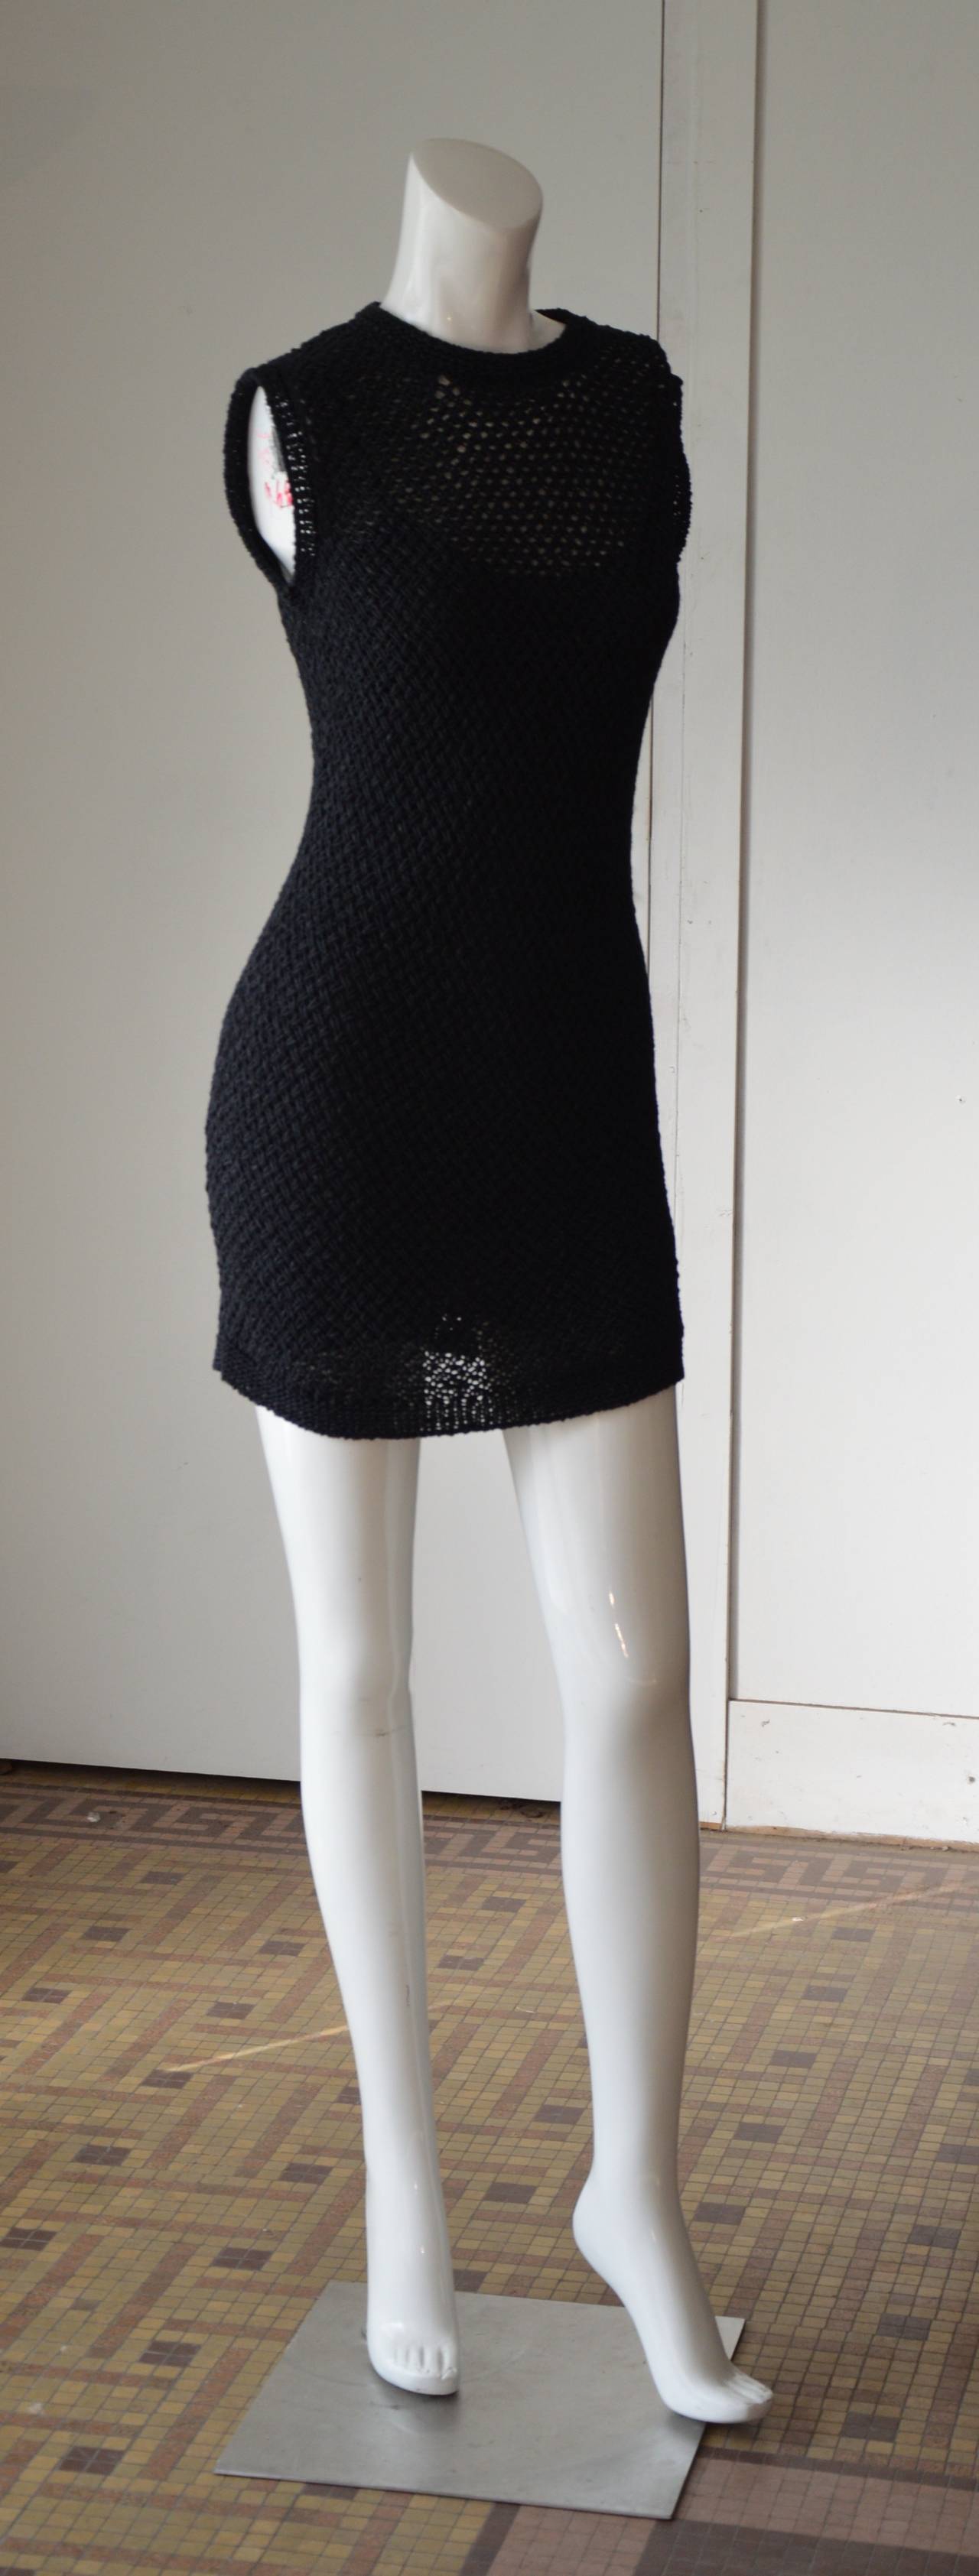 Late 1980s early 1990s this little back crochet knit dress is really perfect both as a dress or a tunic. The under dress is made of black chiffon silk.